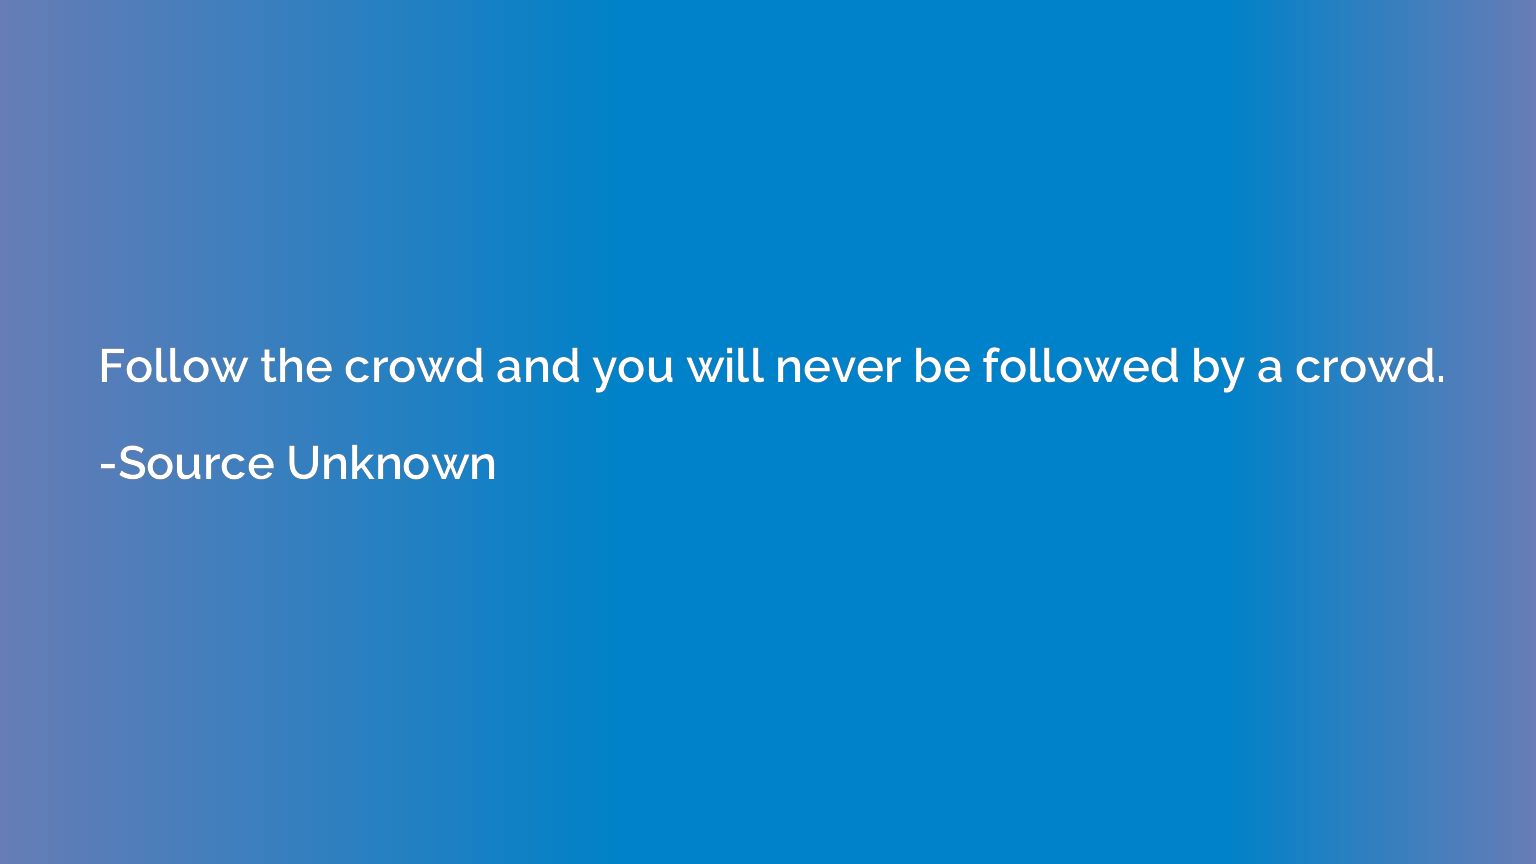 Follow the crowd and you will never be followed by a crowd.